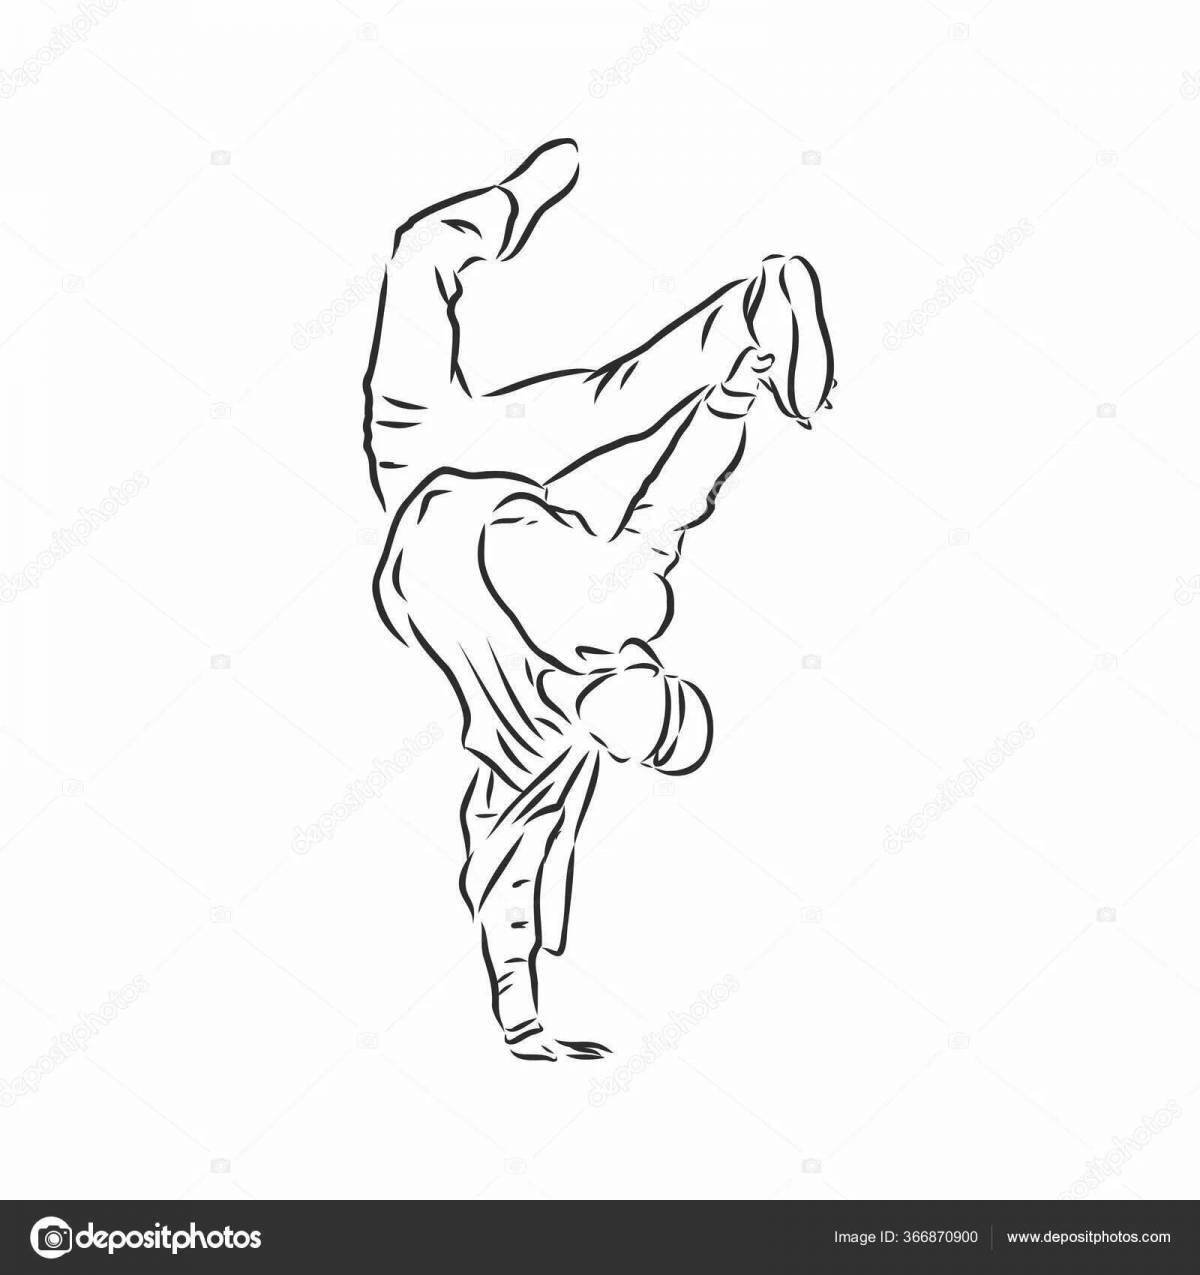 Playful brakedance coloring page